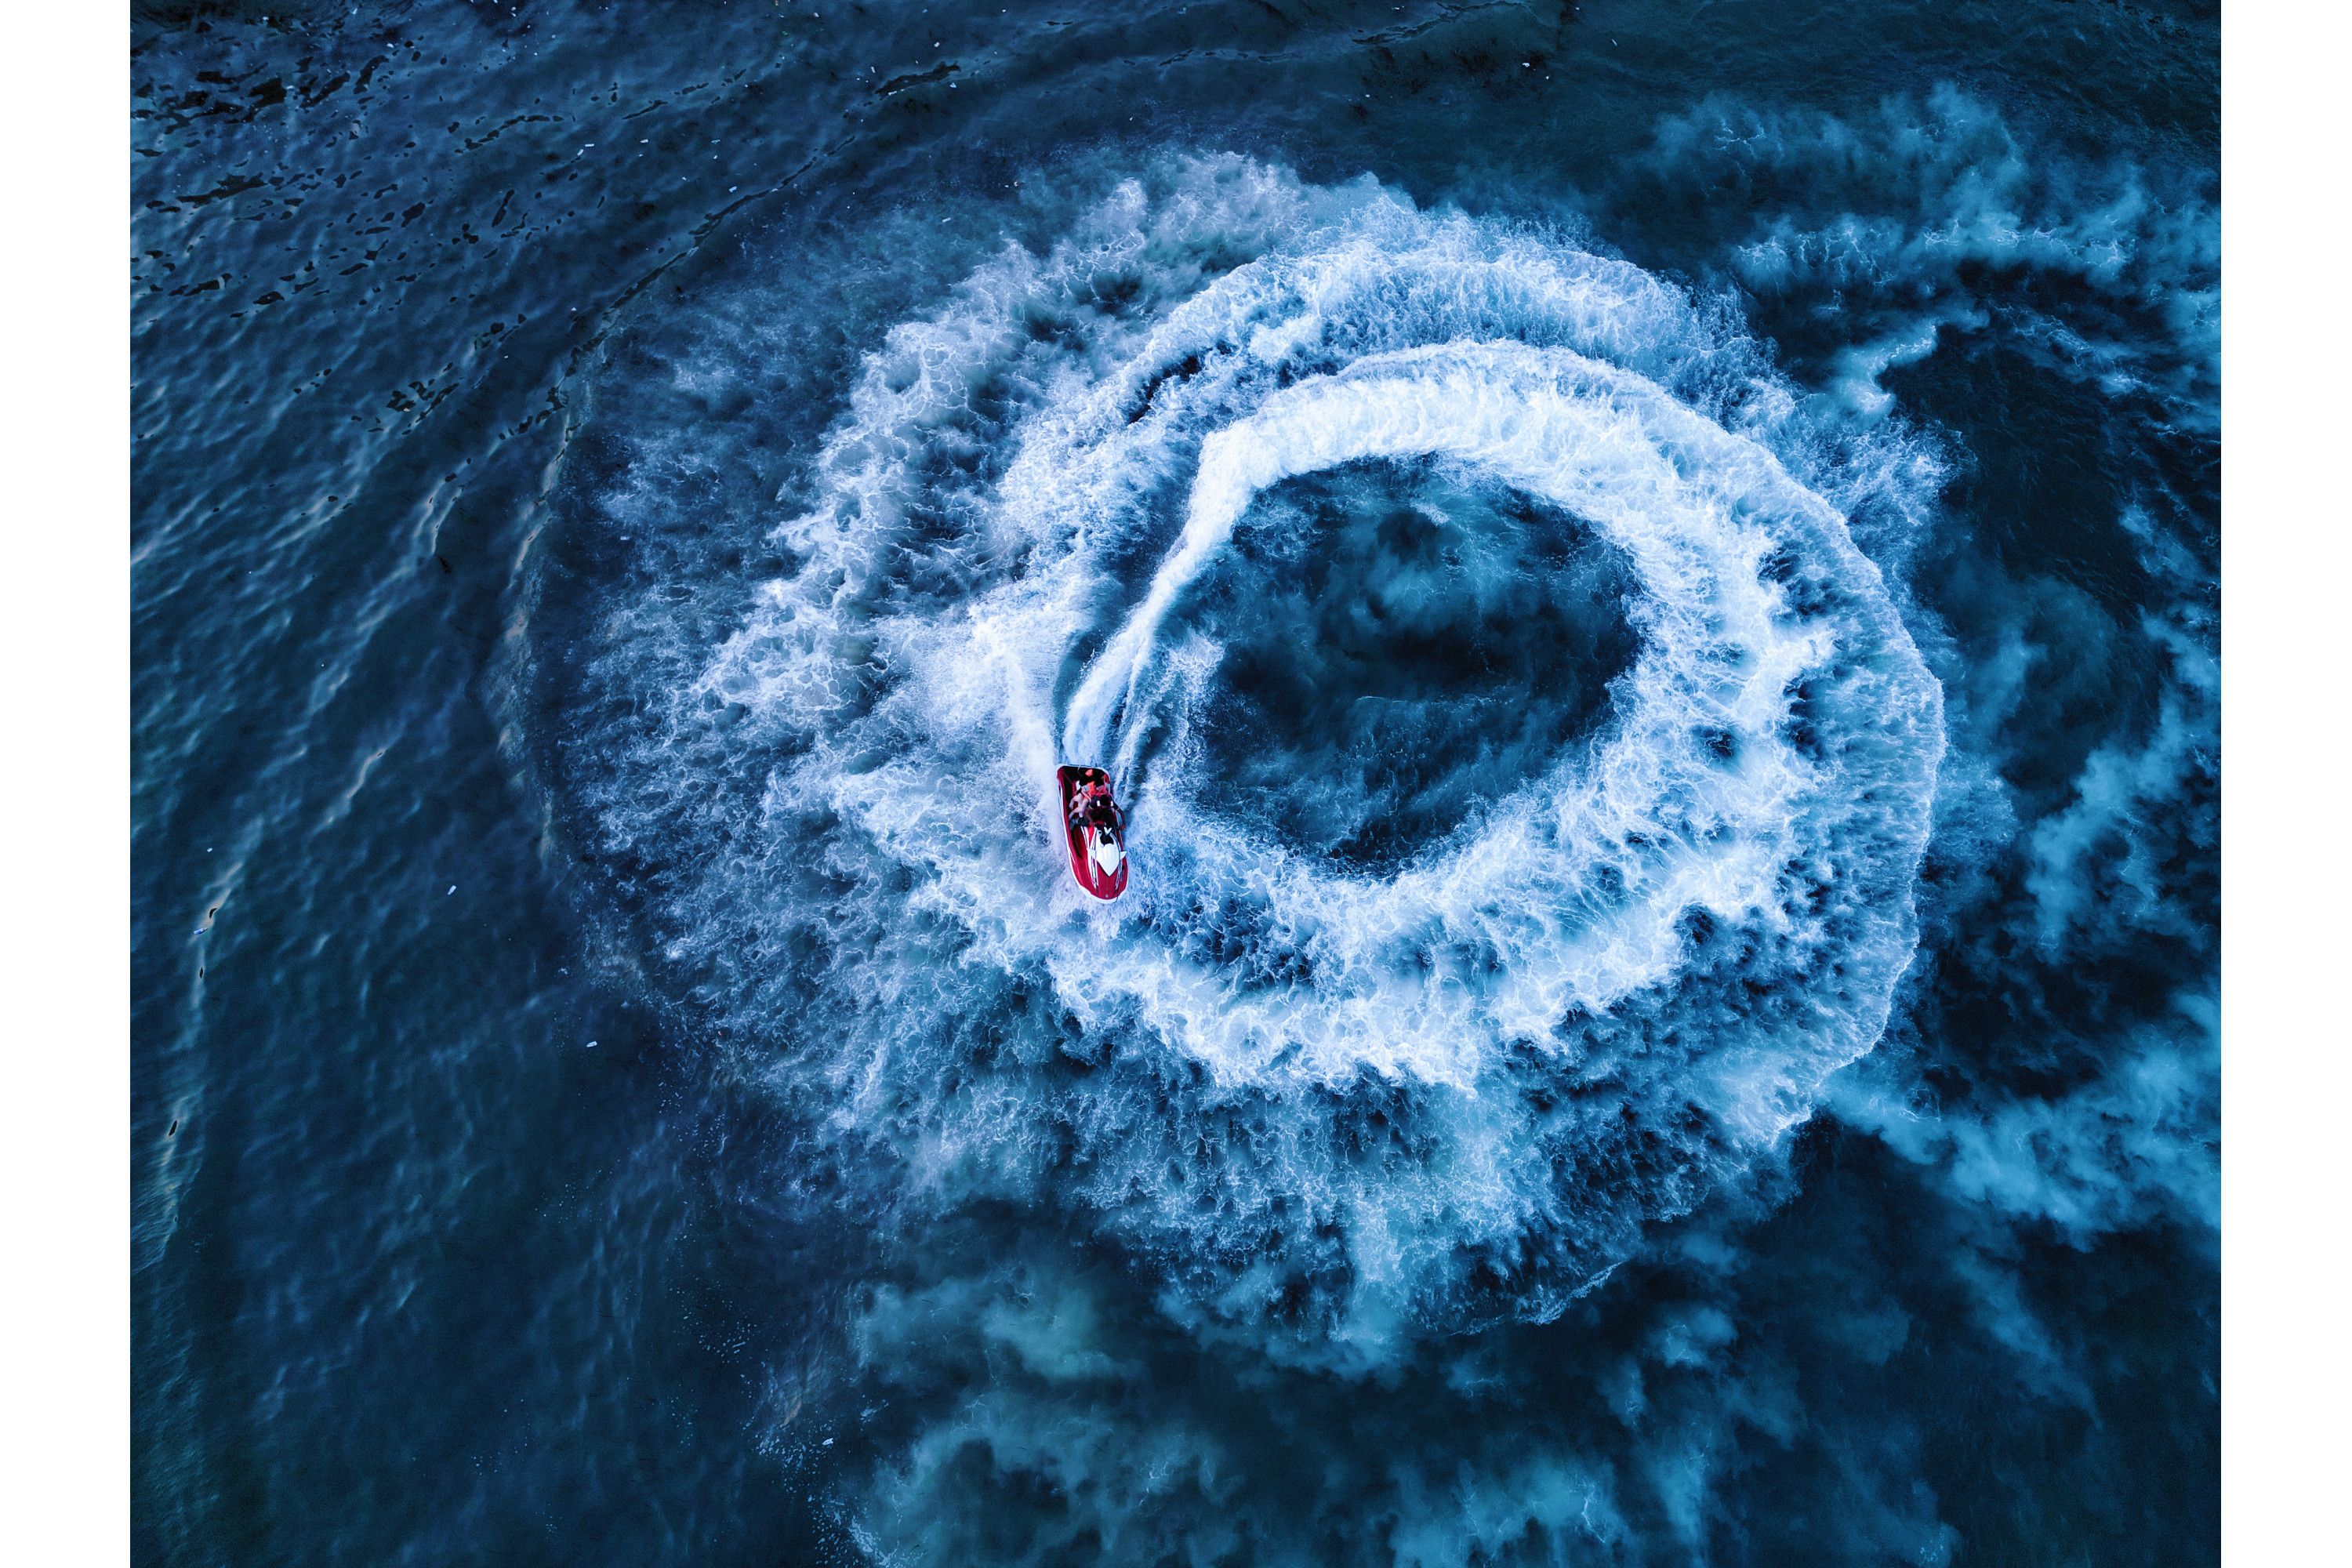 A drone shot of a speedboat